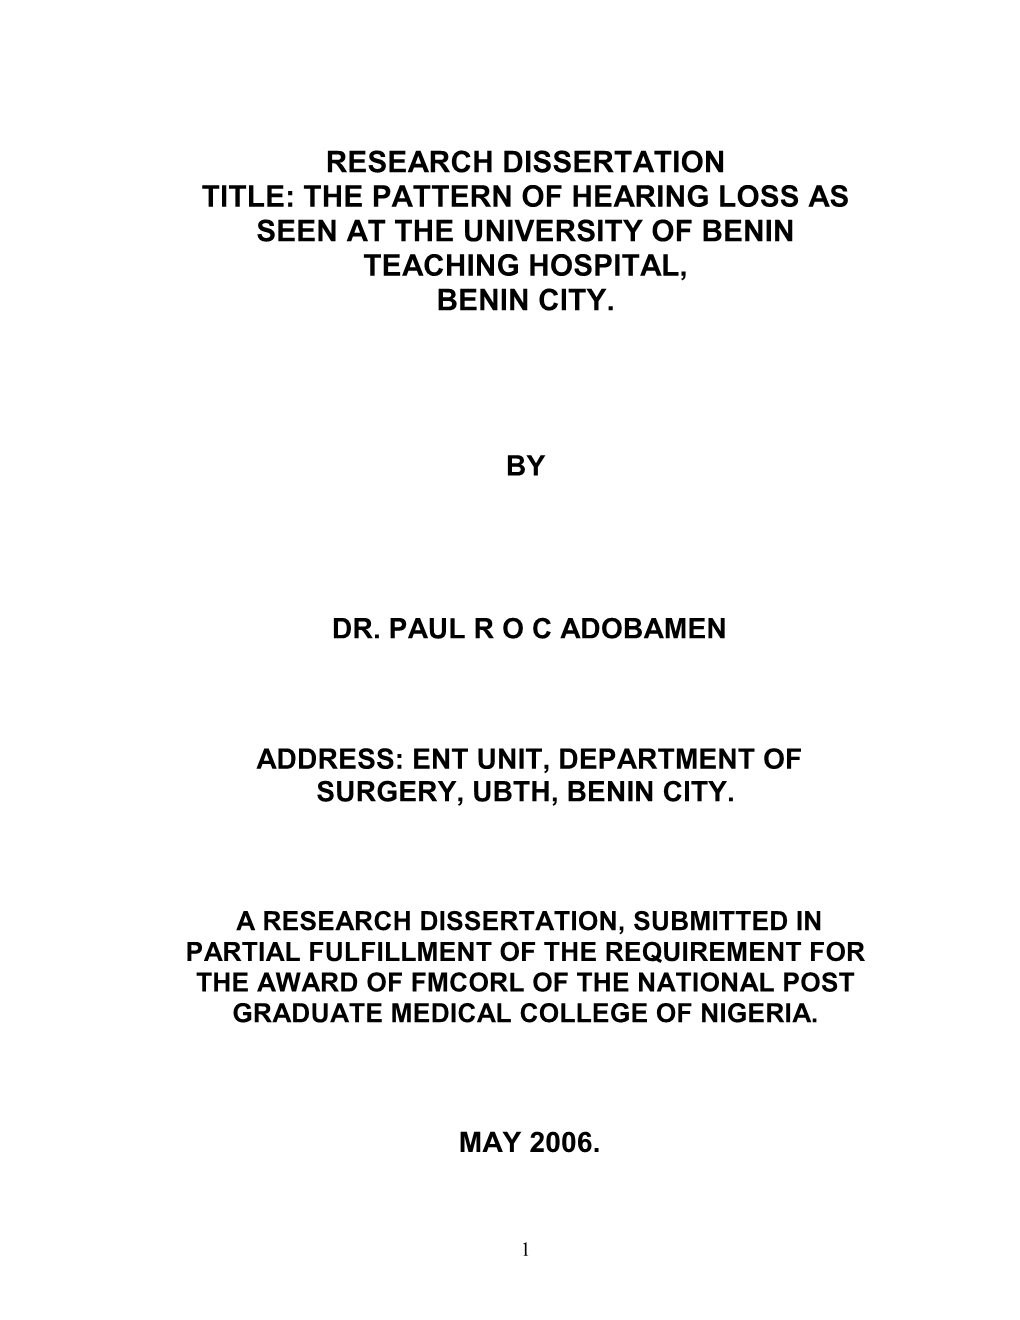 Research Dissertation Title: the Pattern of Hearing Loss As Seen at the University of Benin Teaching Hospital, Benin City